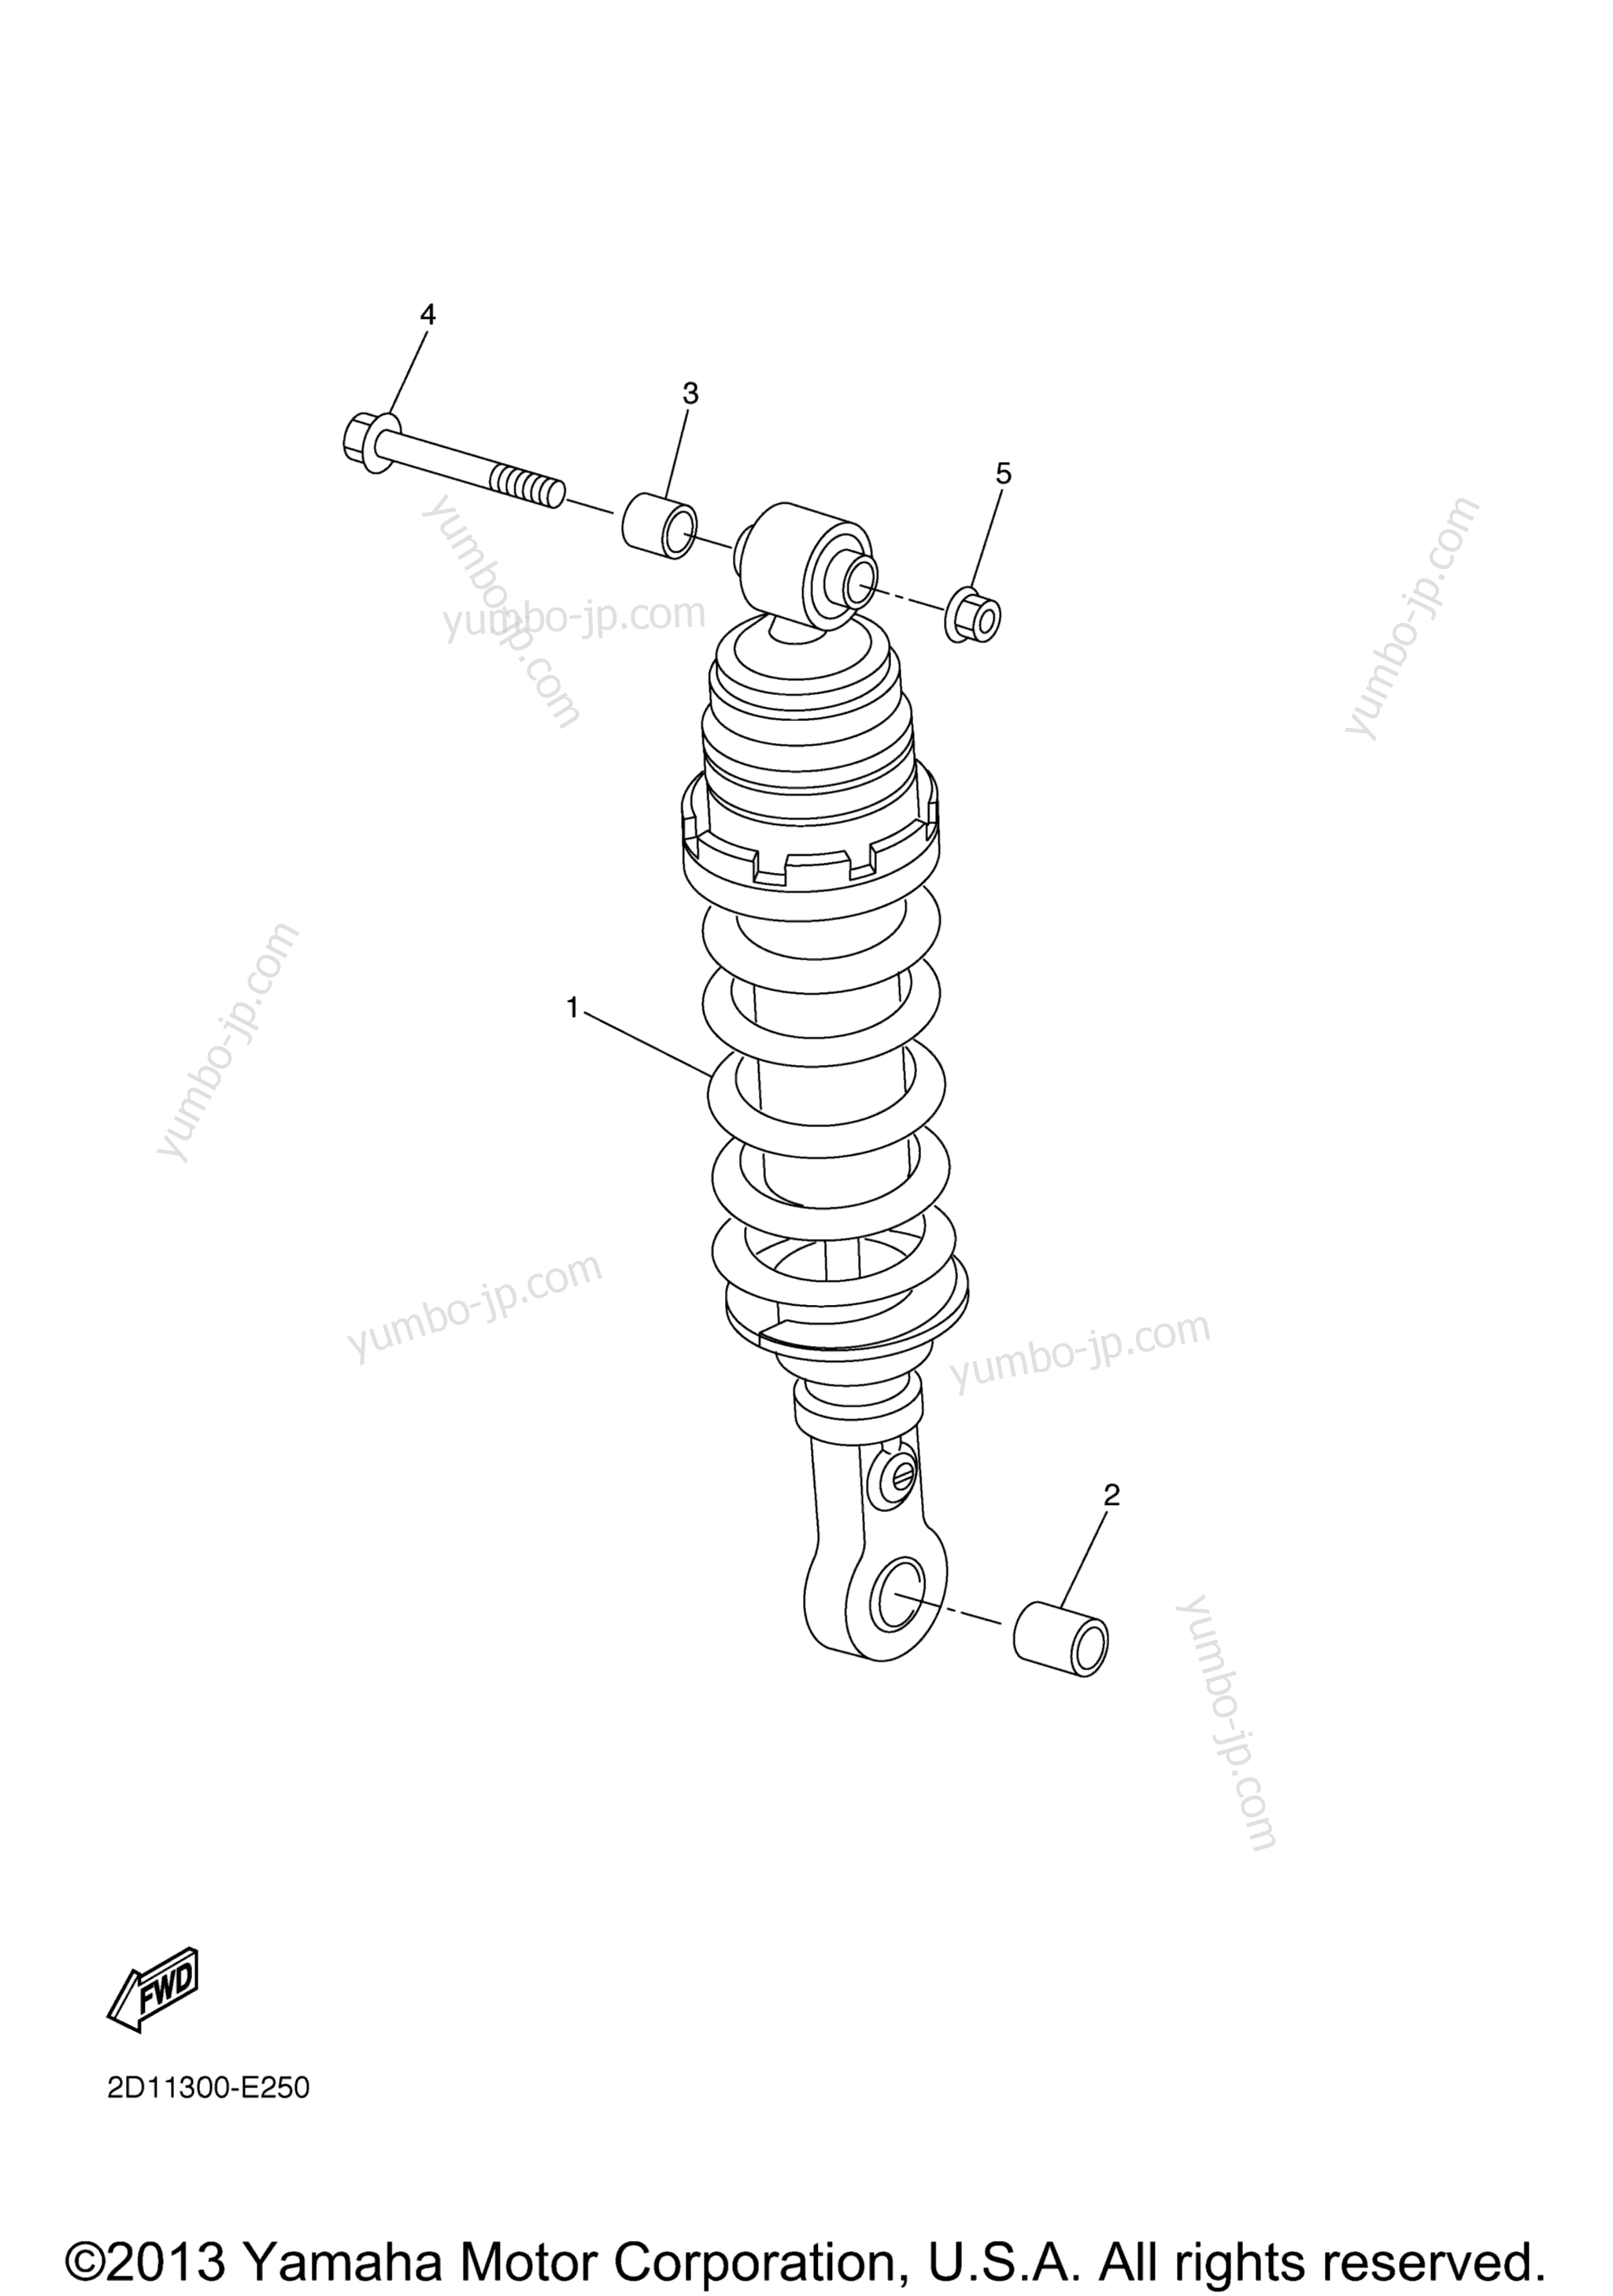 Rear Suspension for motorcycles YAMAHA FZ1 (FZS10D) 2013 year